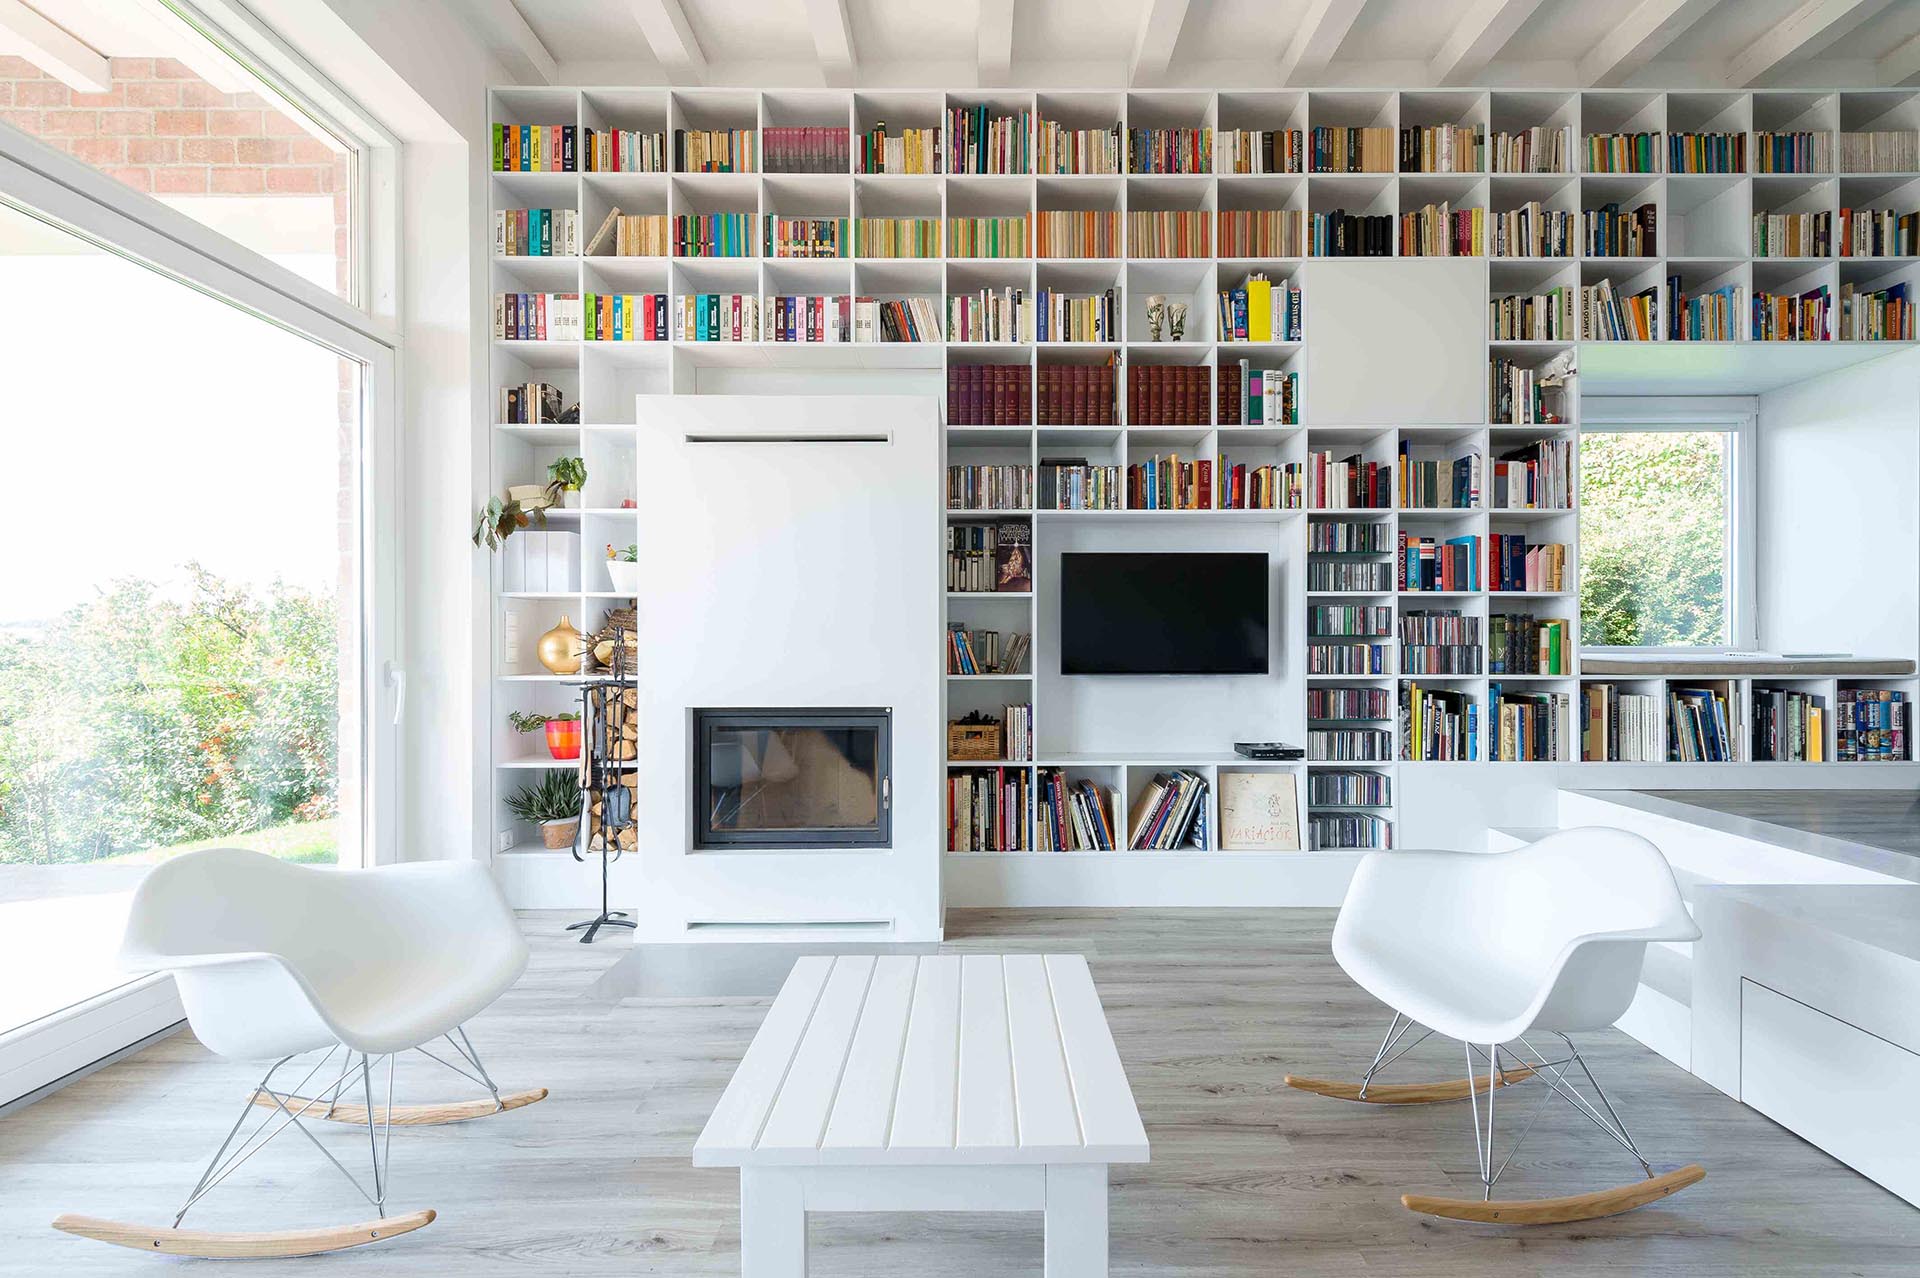 This Long Wall Of Shelving Incorporates Storage, A Fireplace